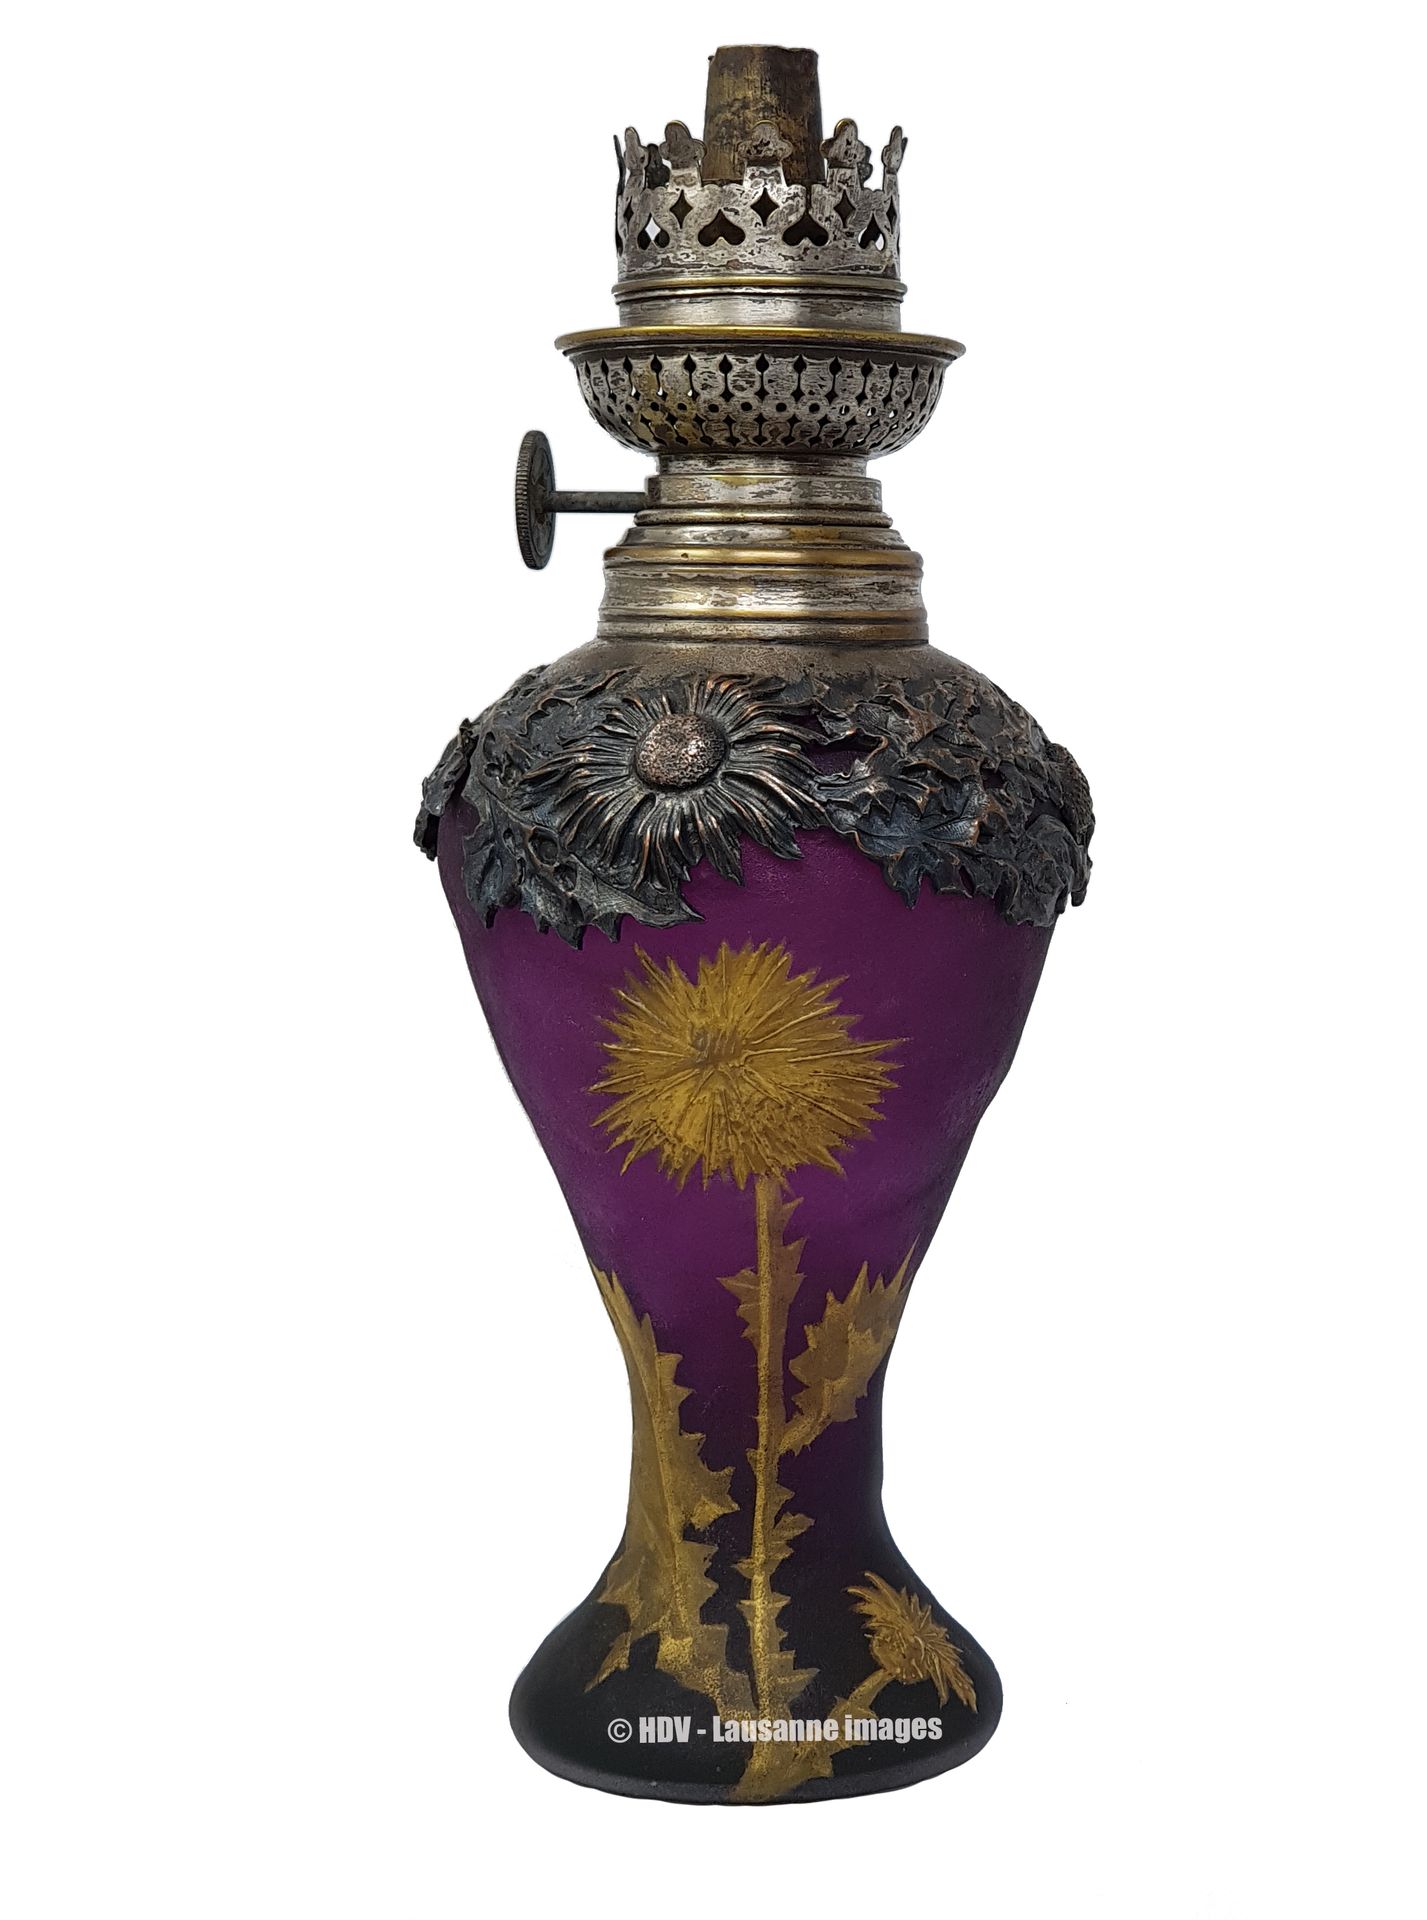 Victor SAGLIER (1809-1894) "Les Chardons" Oil lamp in glass painted with sunflow&hellip;